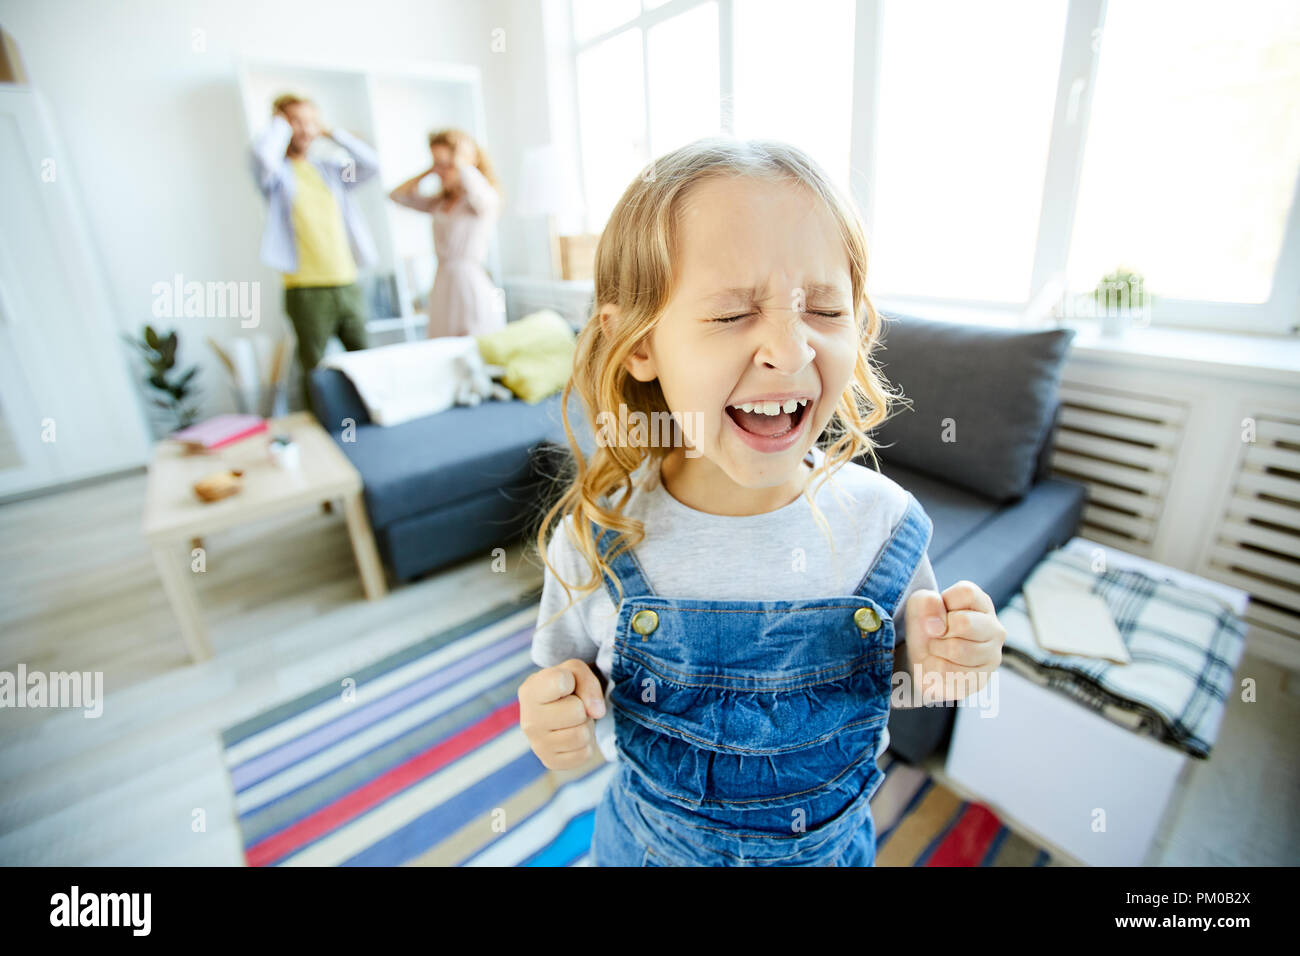 Youthful daughter crying and screaming loudly while being naughty with her shocked parents on background Stock Photo